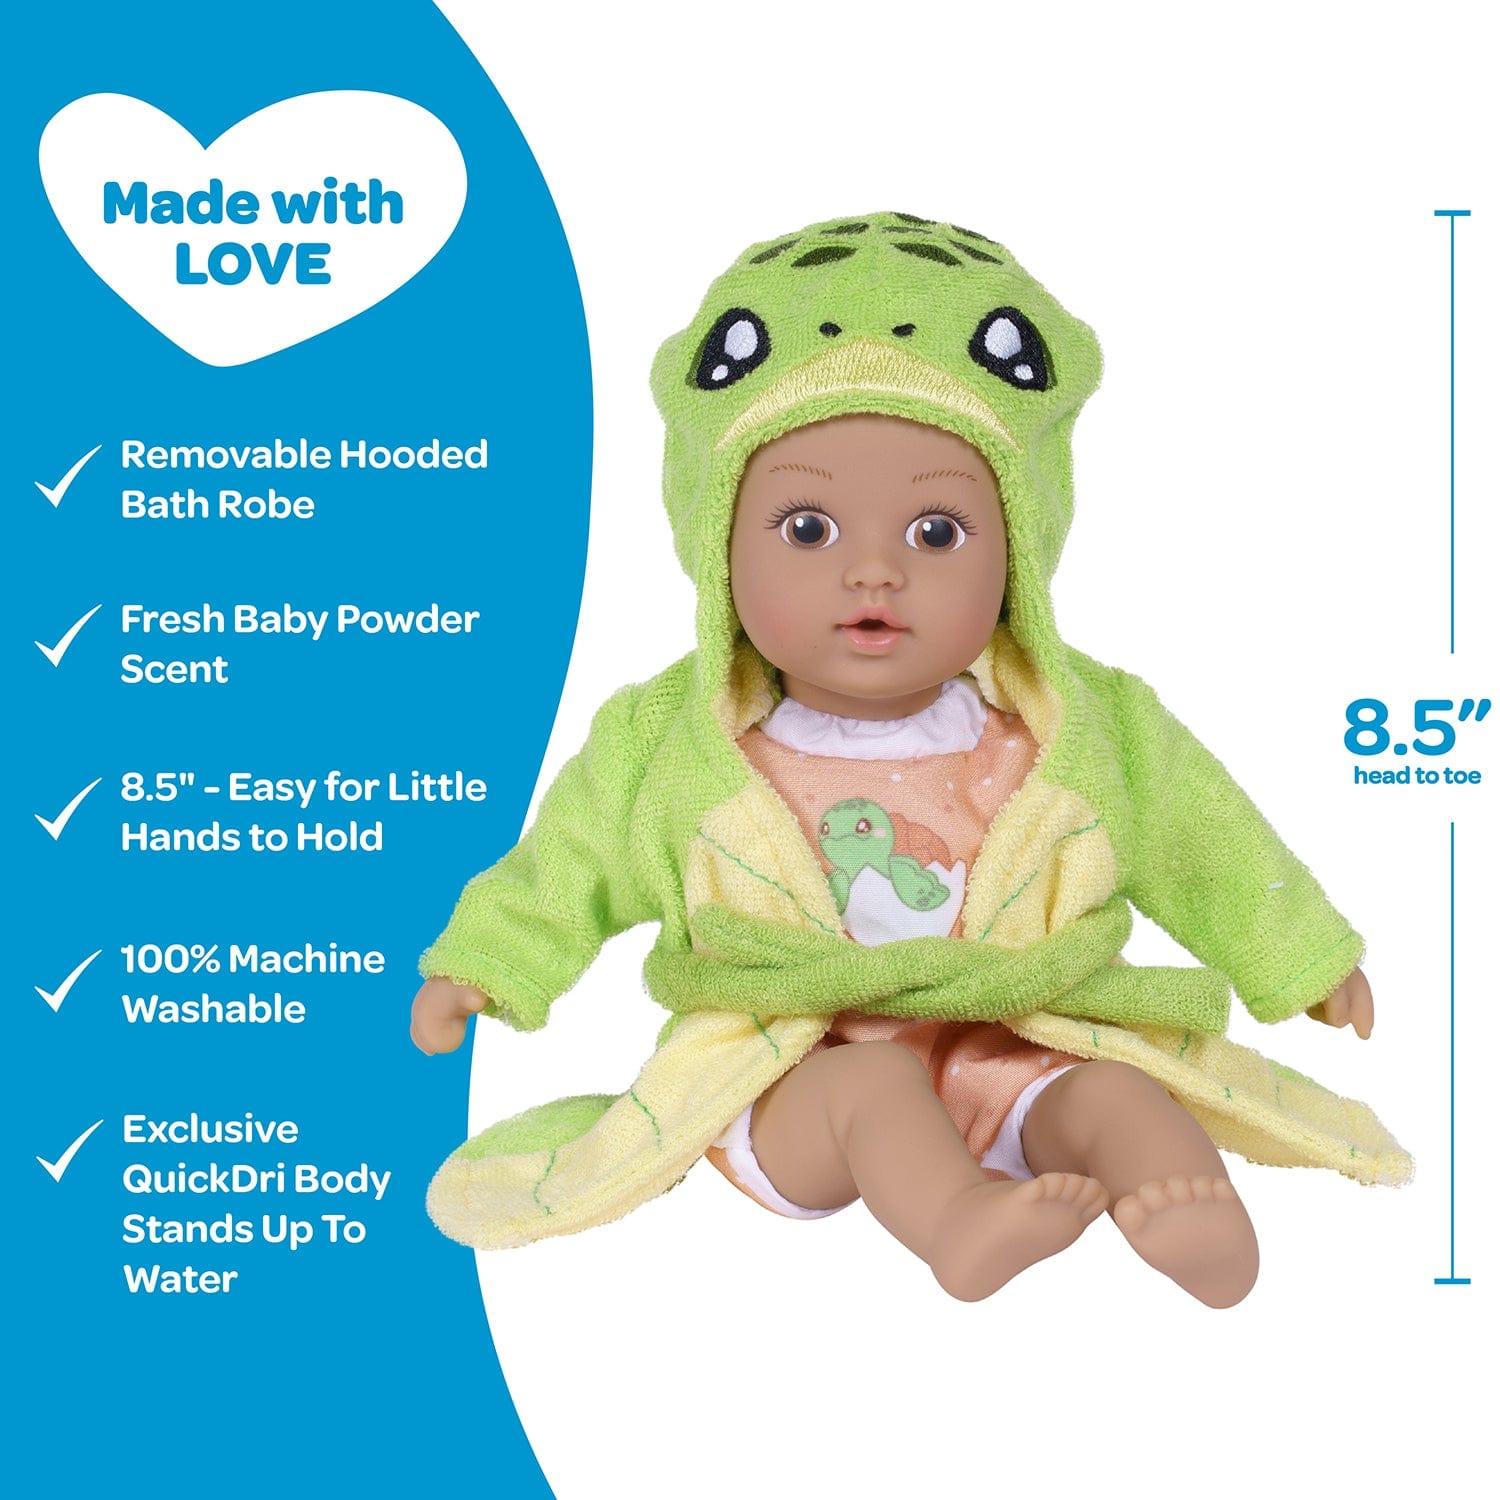 Adora BathTime baby doll set comes with one 8.5-inch baby doll boy, an attached sandy-colored sea turtle-print swimsuit, and an embroidered hooded Sea Turtle terry bathrobe complete with an embroidered face and green turtle shell on the back. 100% machine washable - made to love and last with Adora's exclusive Quick Dry fabric. 